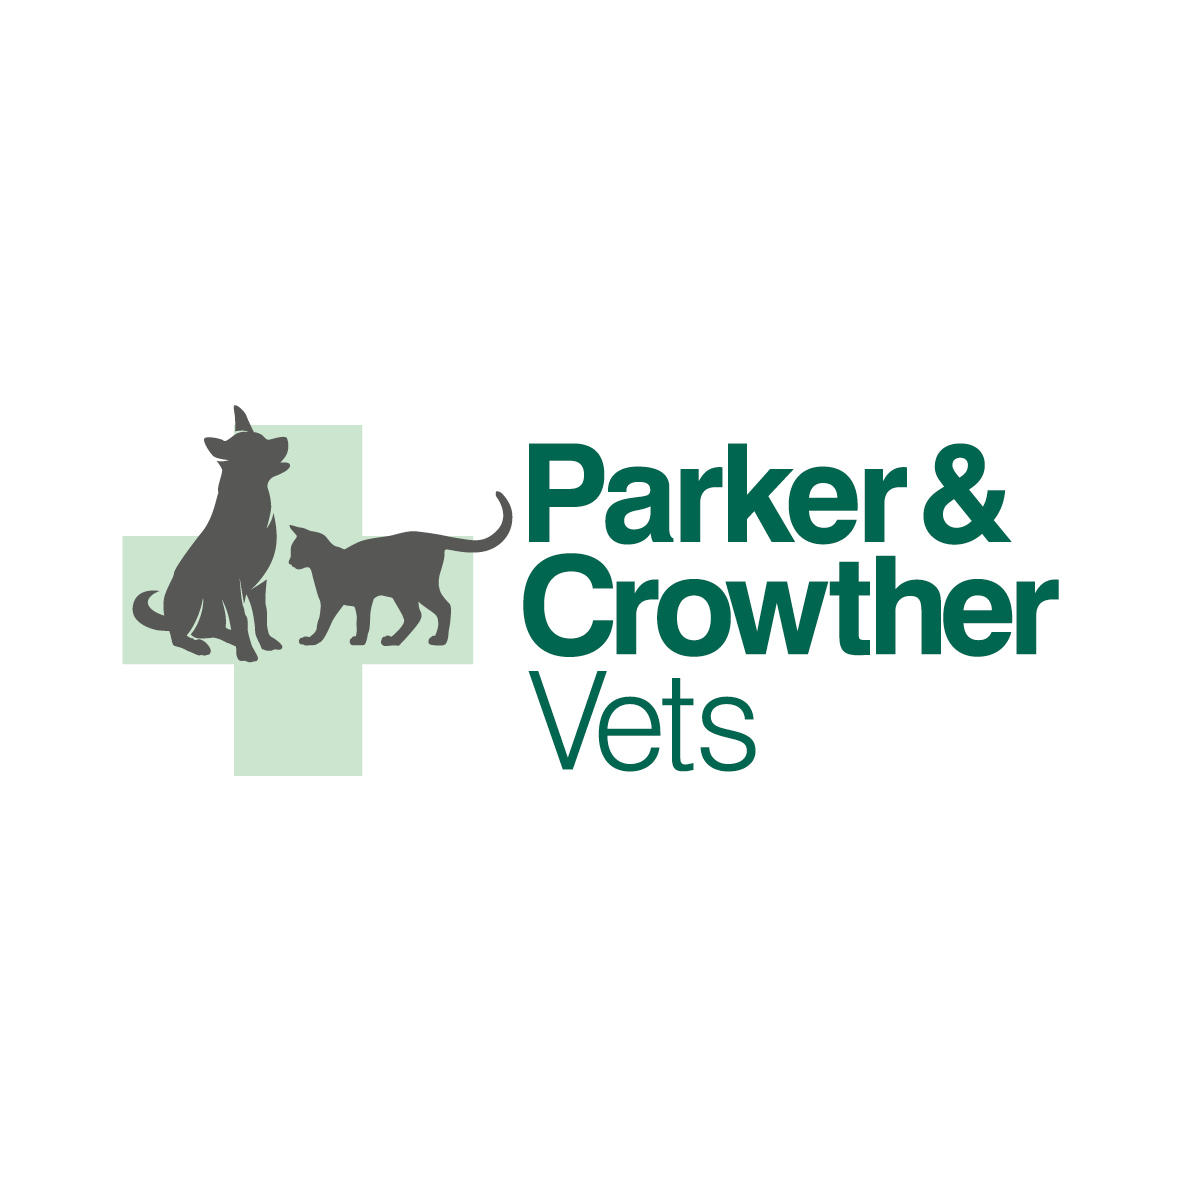 Parker & Crowther Vets, Daleside Logo